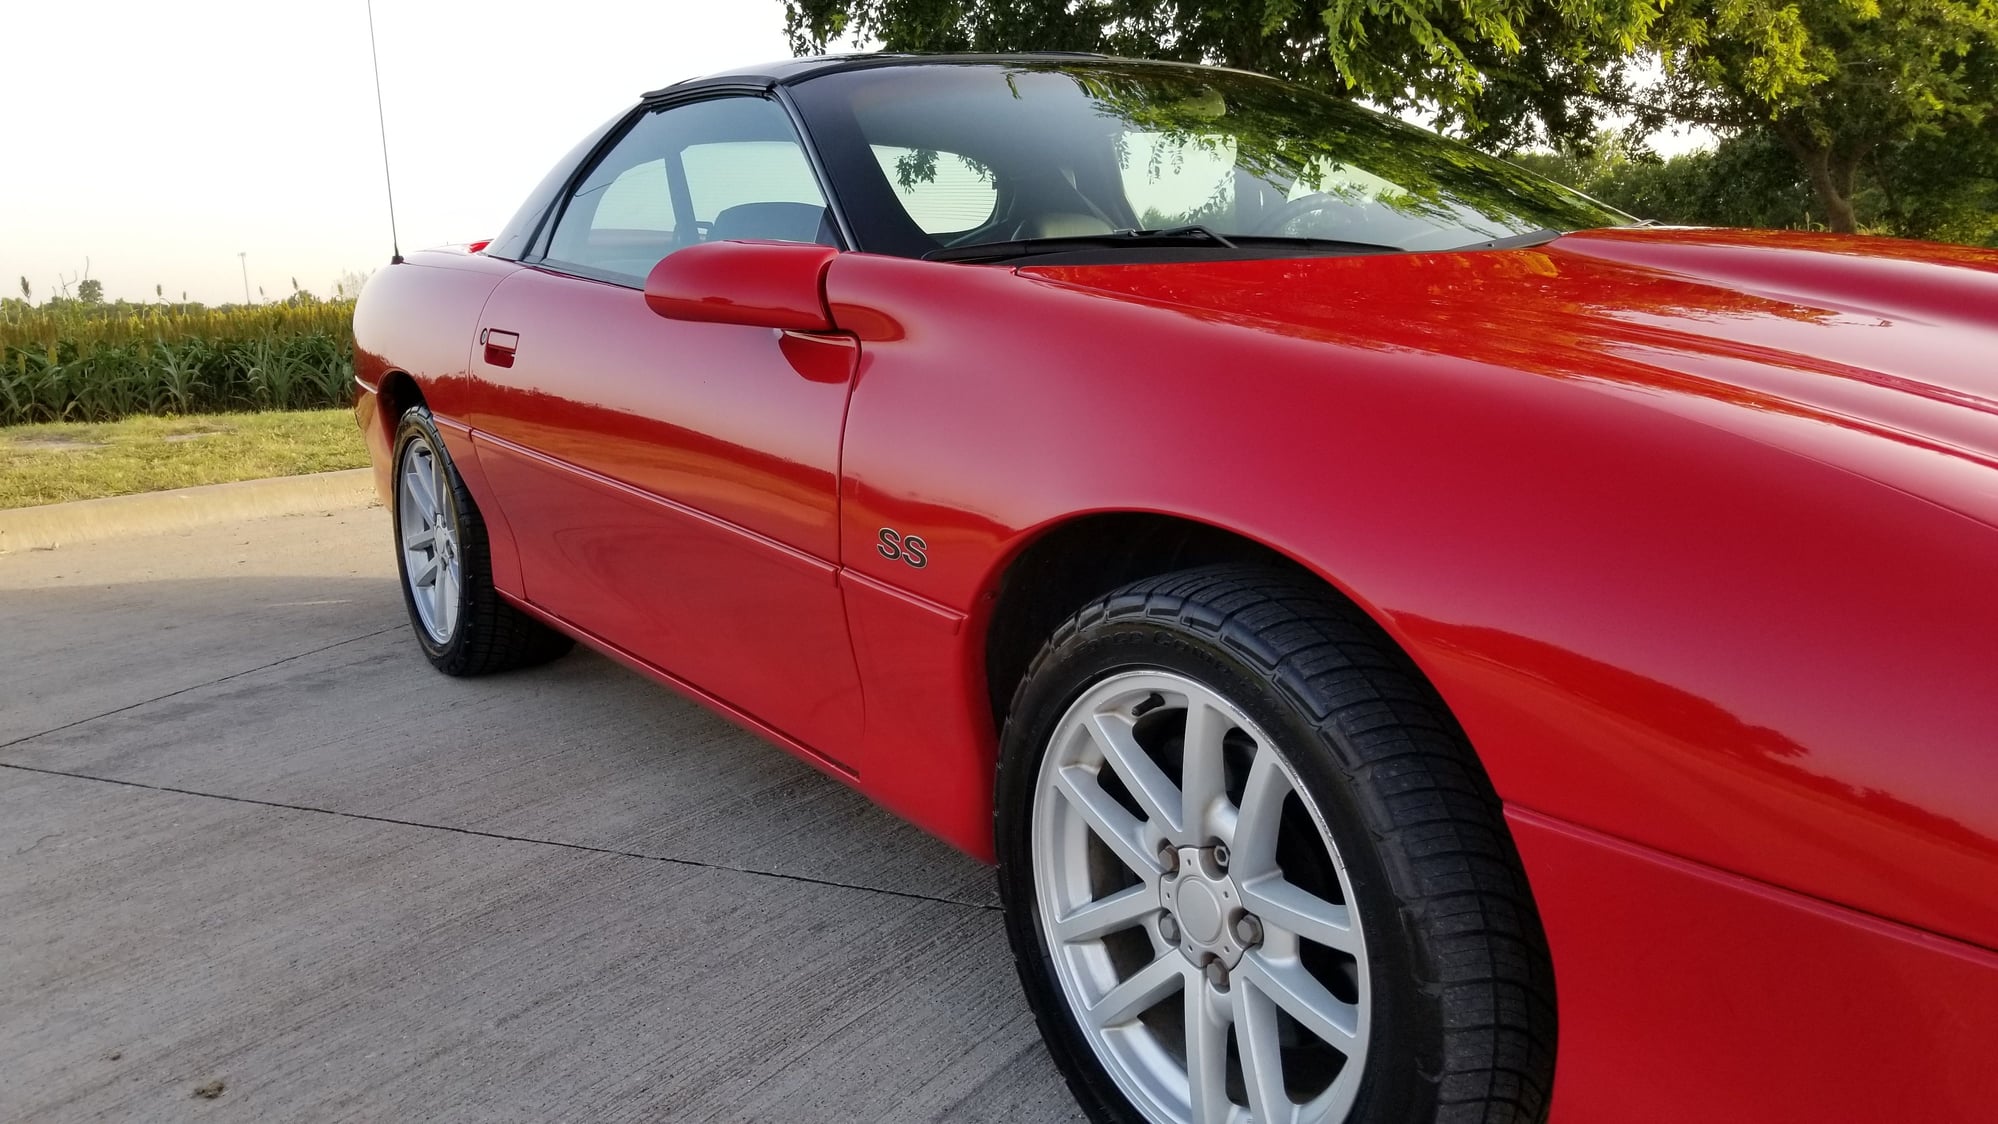 2000 Chevrolet Camaro - 2000 Chevrolet Camaro SS - Used - VIN 2G1FP22GXY2111248 - 72,152 Miles - 8 cyl - 2WD - Manual - Coupe - Red - Rockwall, TX 75087, United States